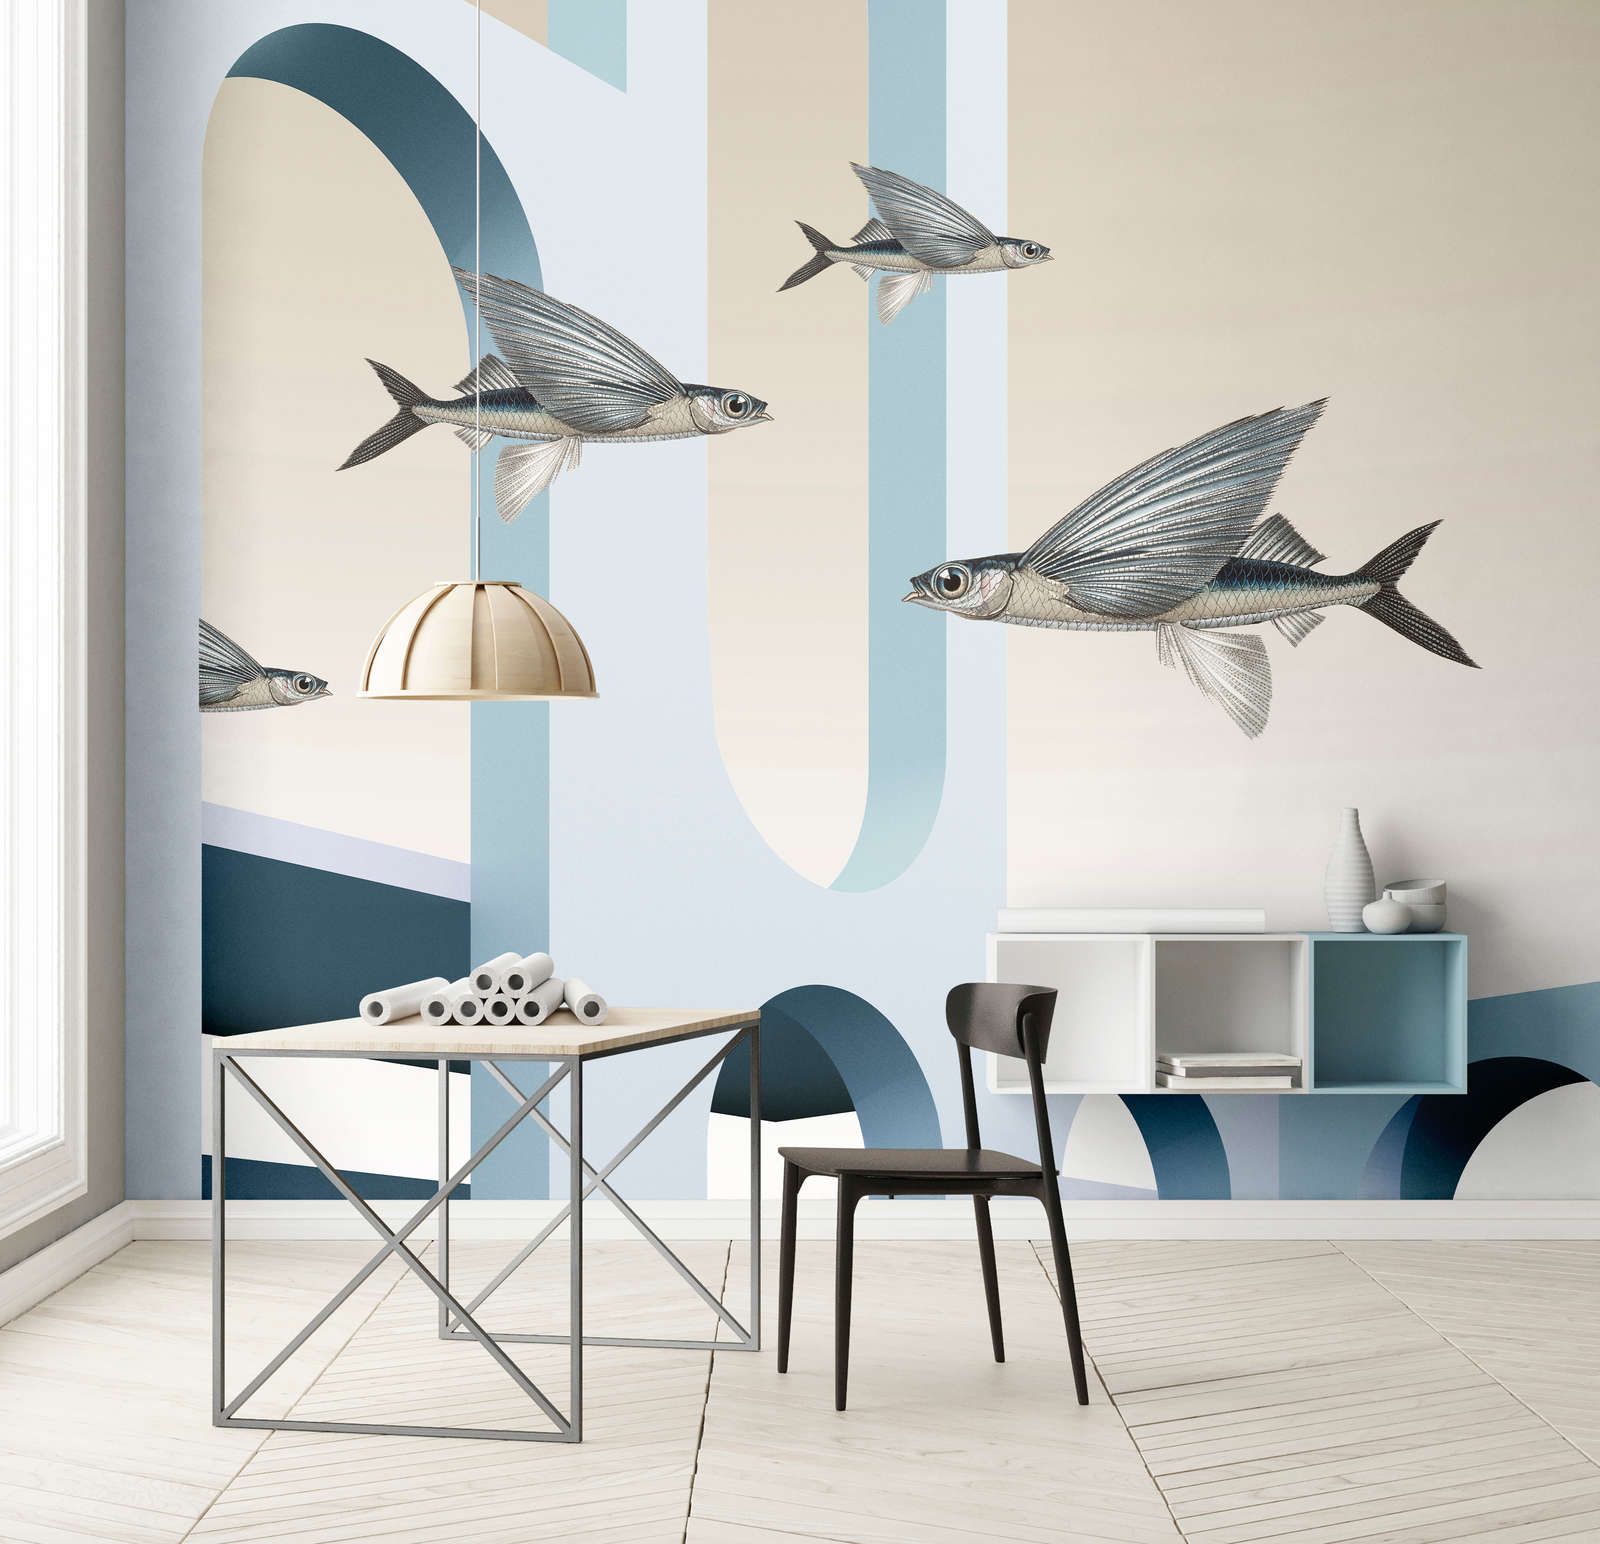             styx - Photo wallpaper with abstract 3D architecture and flying fish - Smooth, slightly pearly shimmering non-woven fabric
        